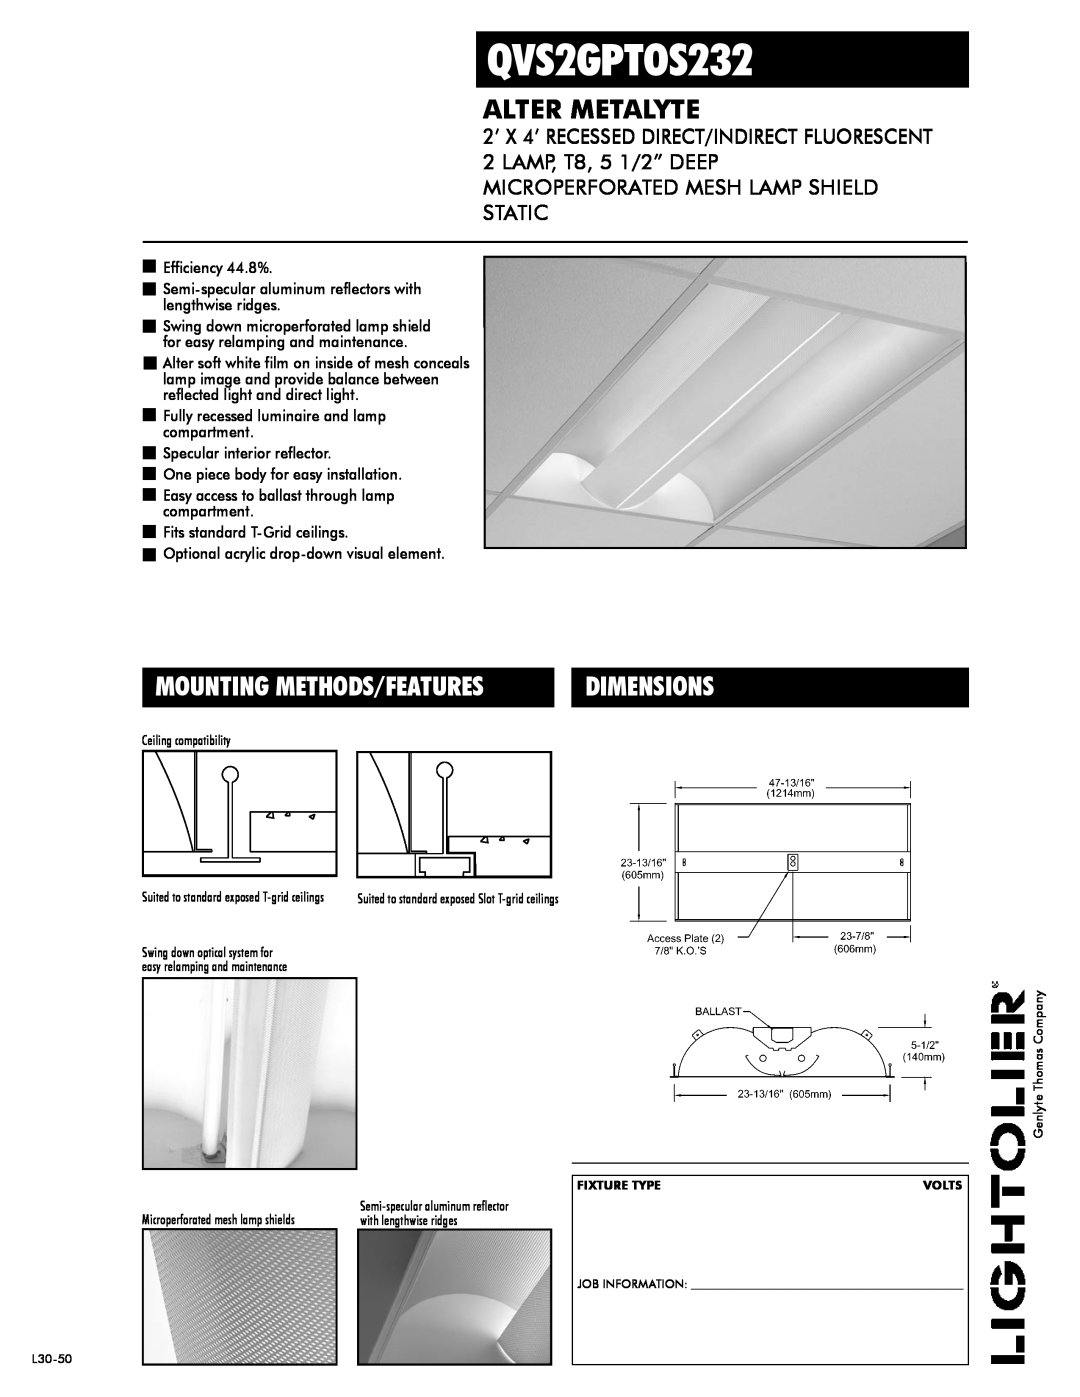 Lightolier QVS2GPTOS232 dimensions Alter Metalyte, Dimensions, Mounting Methods/Features 